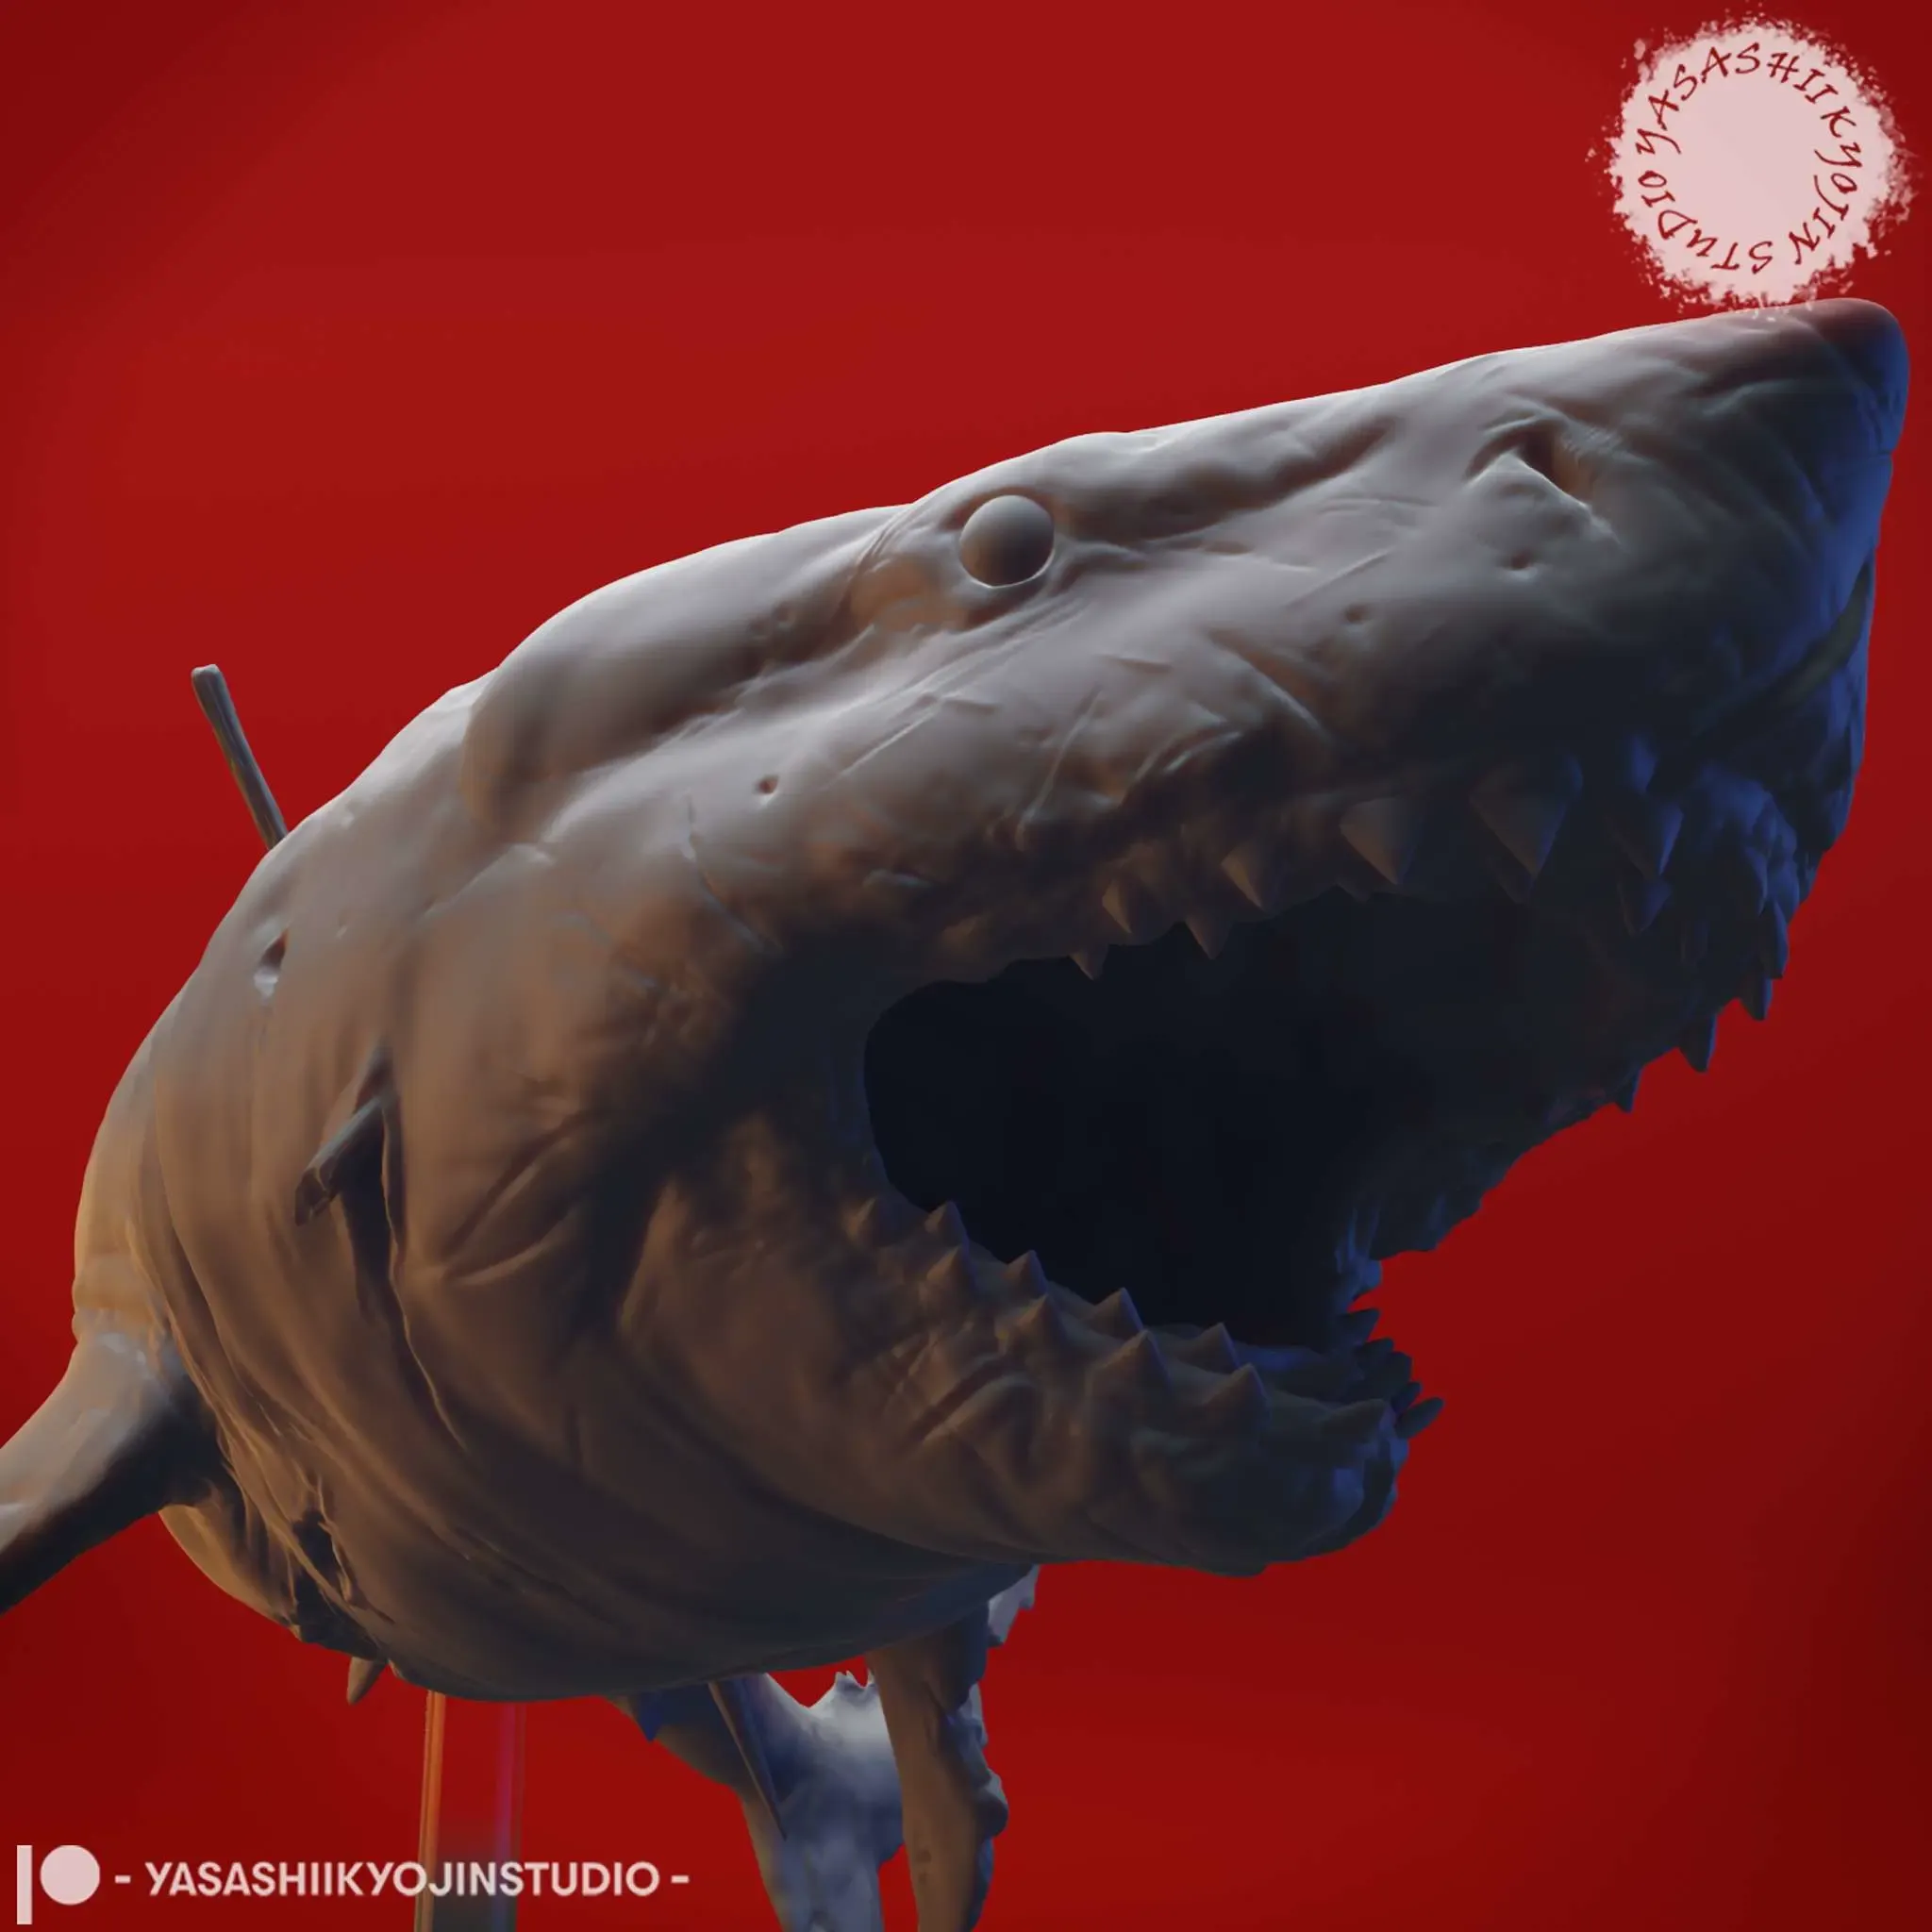 Great Wight Shark - Tabletop Miniature (Pre-Supported)